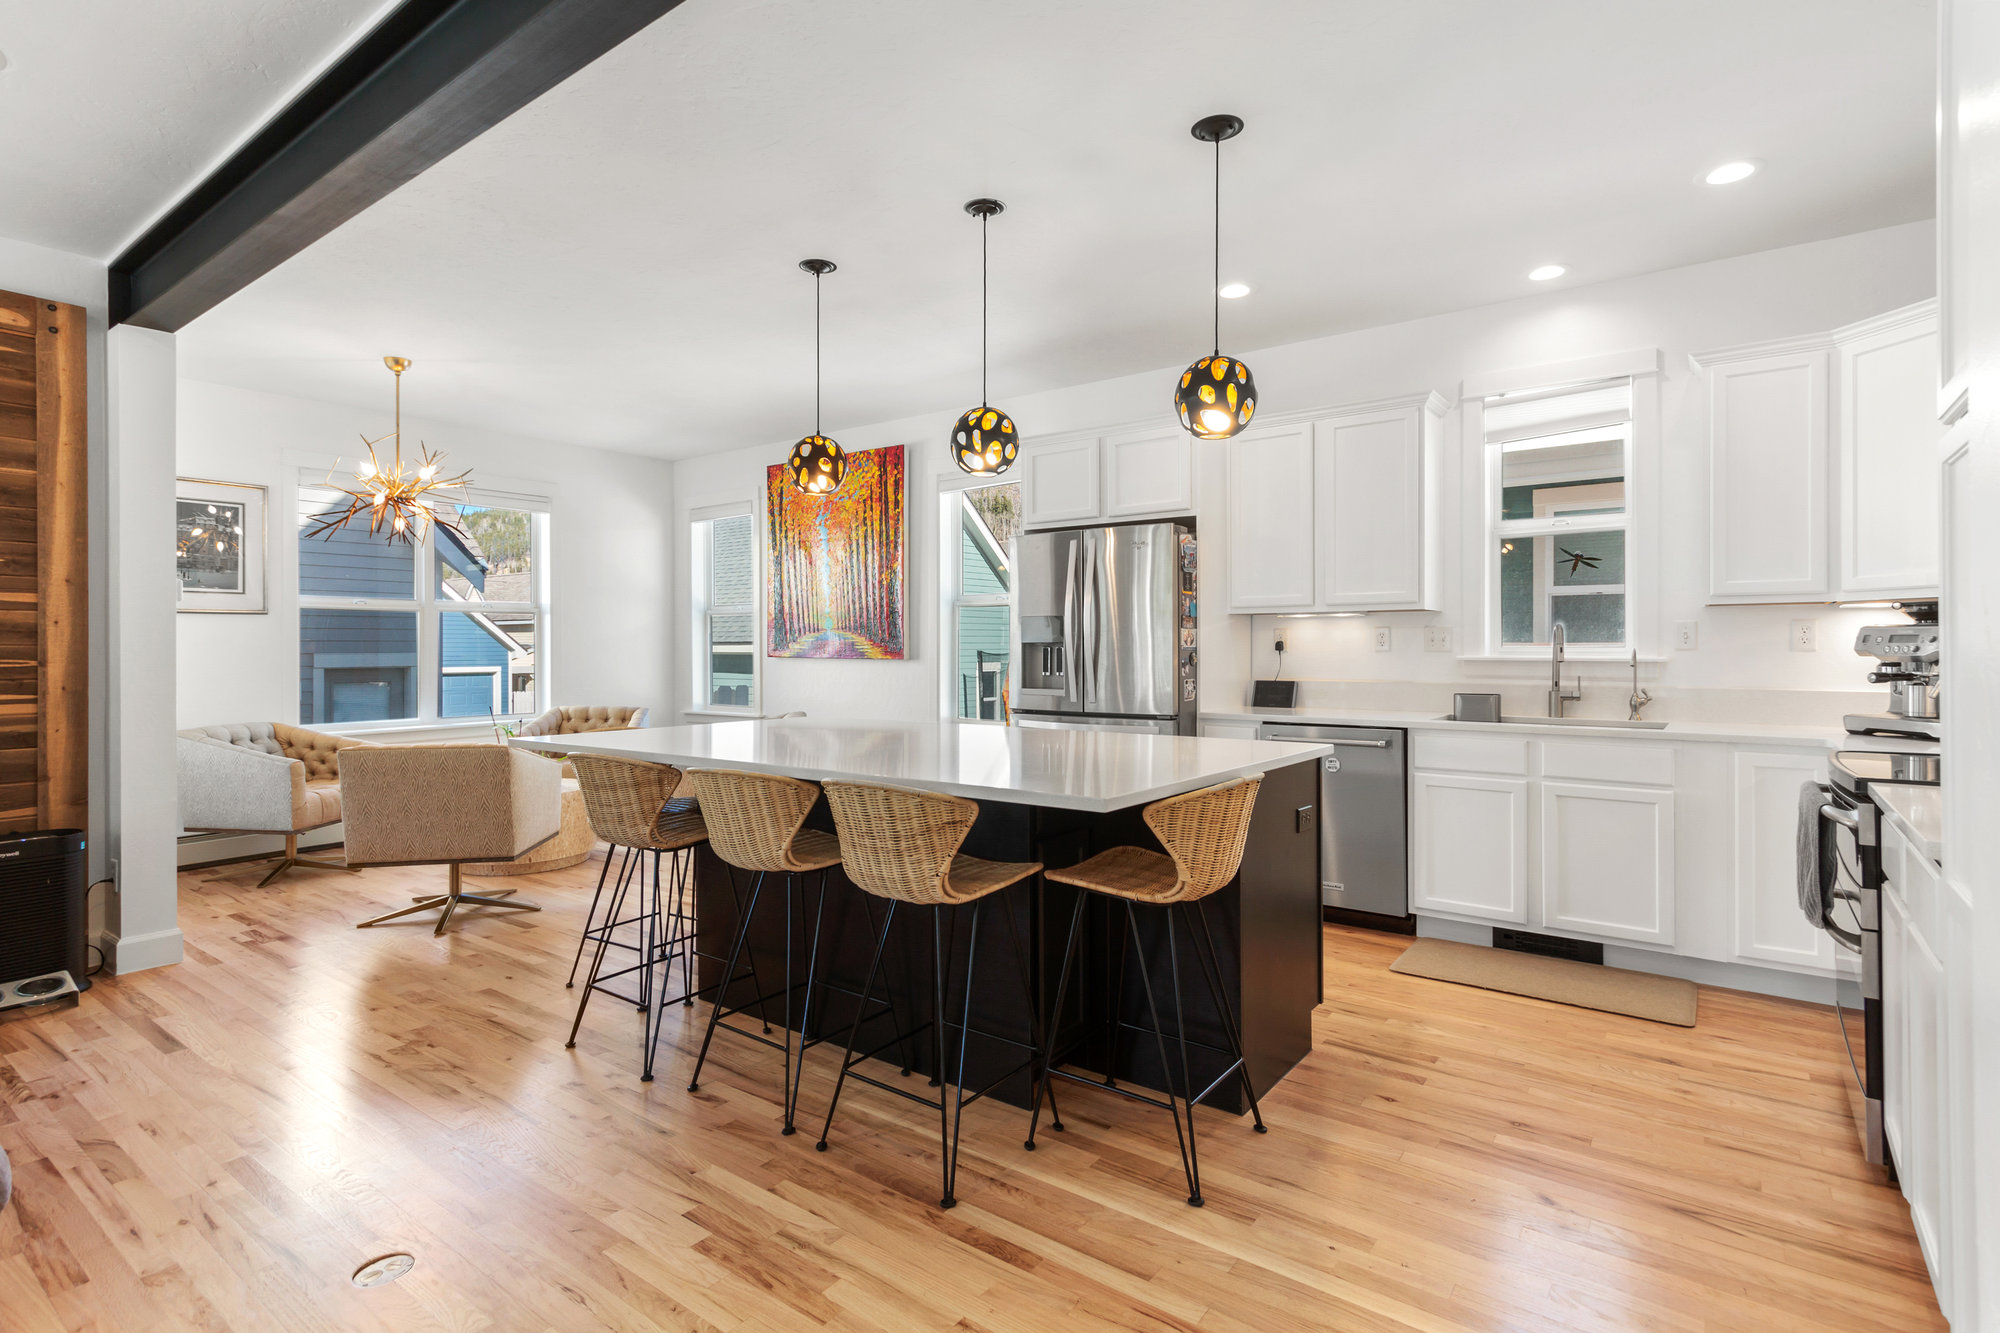 Image of a kitchen and living area with statement lighting